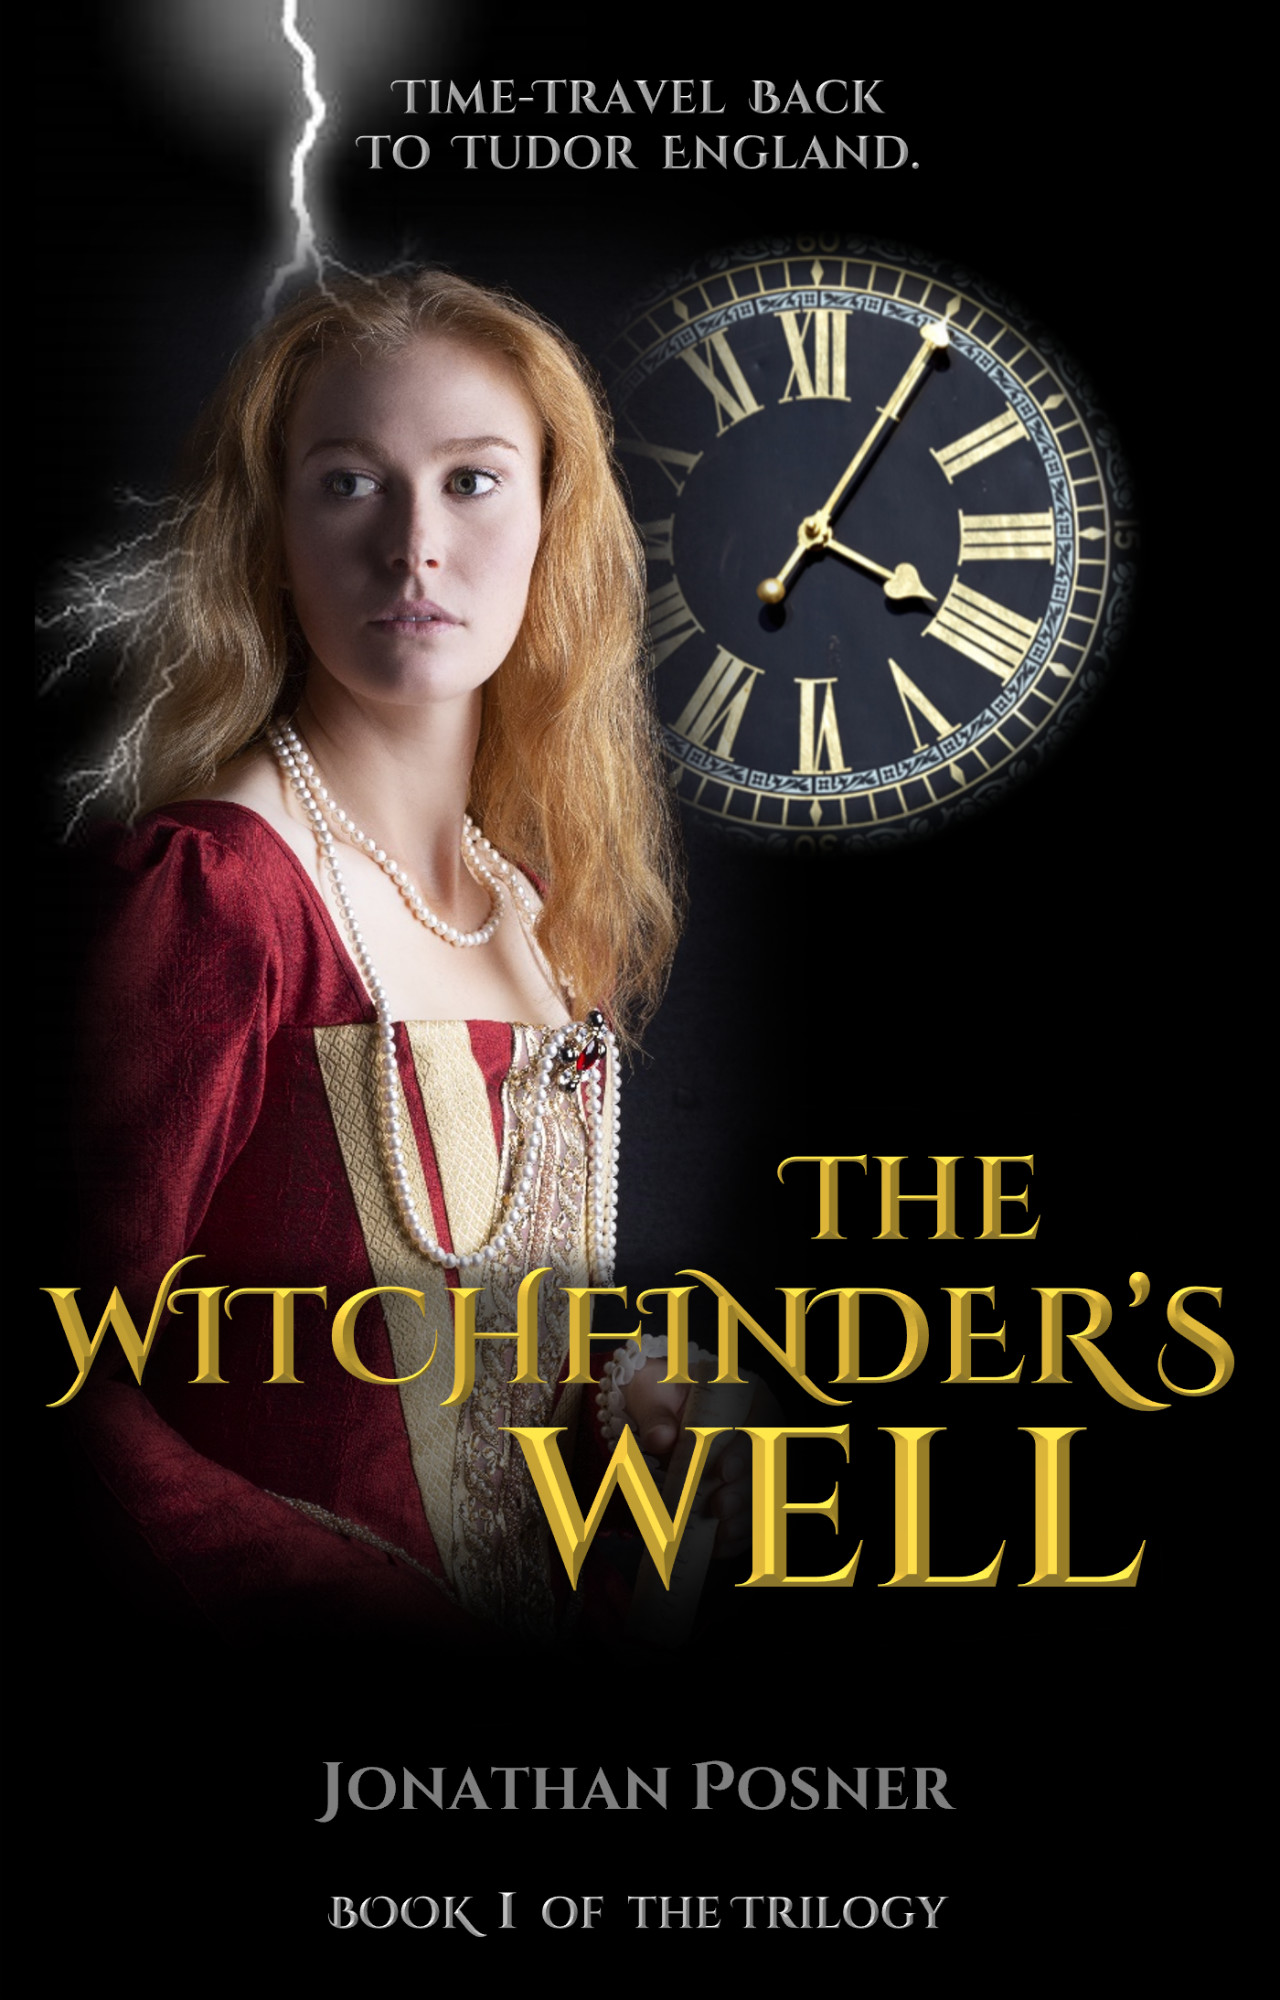 The Witchfinder’s Well